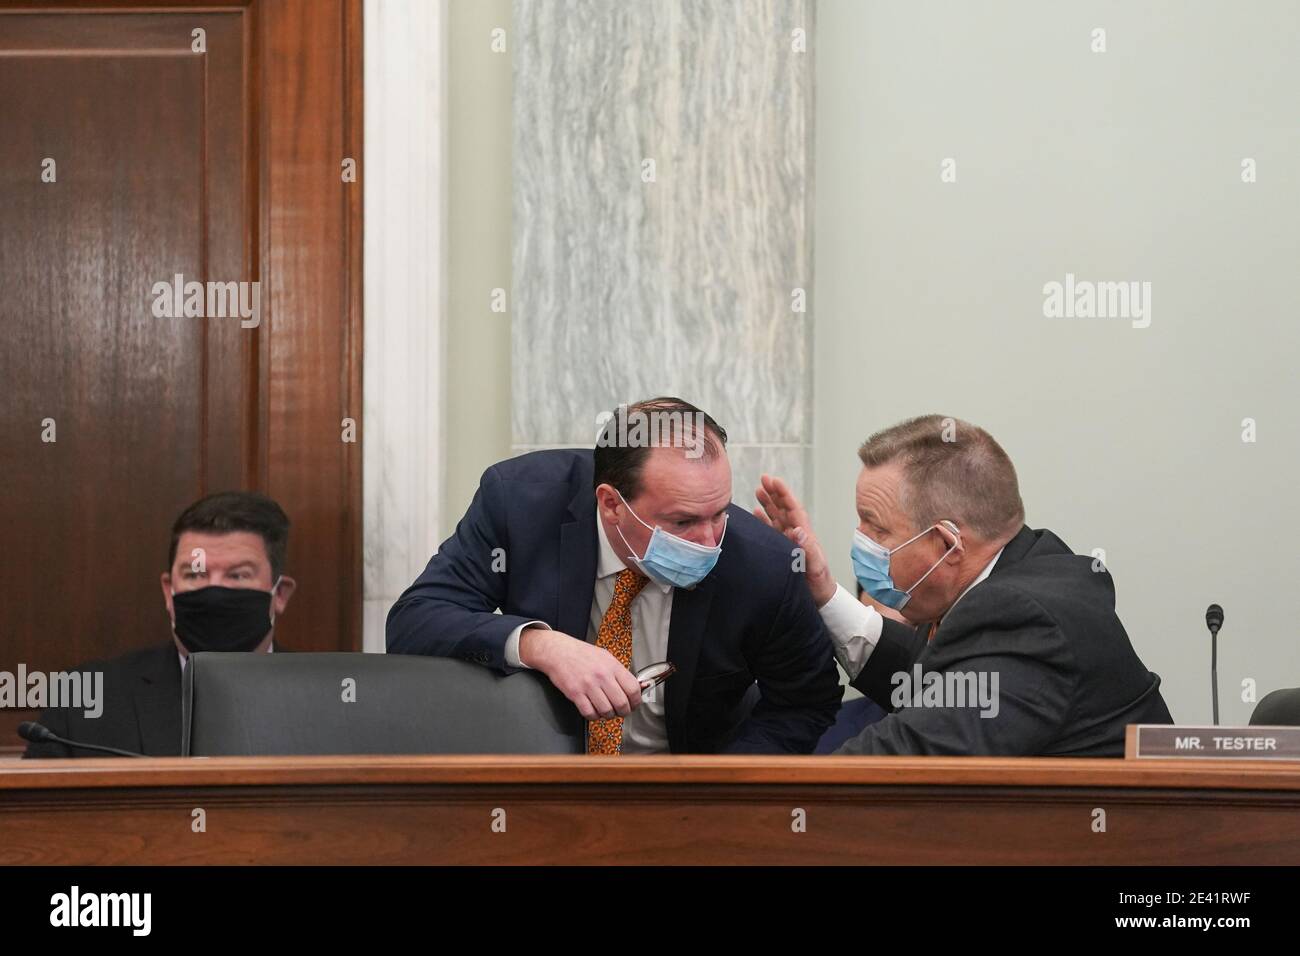 United States Senator Jon Tester (Democrat of Montana), right, and US Senator Mike Lee (Republican of Utah), wear protective masks while talking during a Senate Commerce, Science and Transportation Committee confirmation hearing for U.S. Secretary of Transportation nominee Pete Buttigieg in Washington, DC, U.S., on Thursday, Jan. 21, 2021. Buttigieg, is pledging to carry out the administration's ambitious agenda to rebuild the nation's infrastructure, calling it a 'generational opportunity' to create new jobs, fight economic inequality and stem climate change. Credit: Stefani Reynolds/Pool Stock Photo